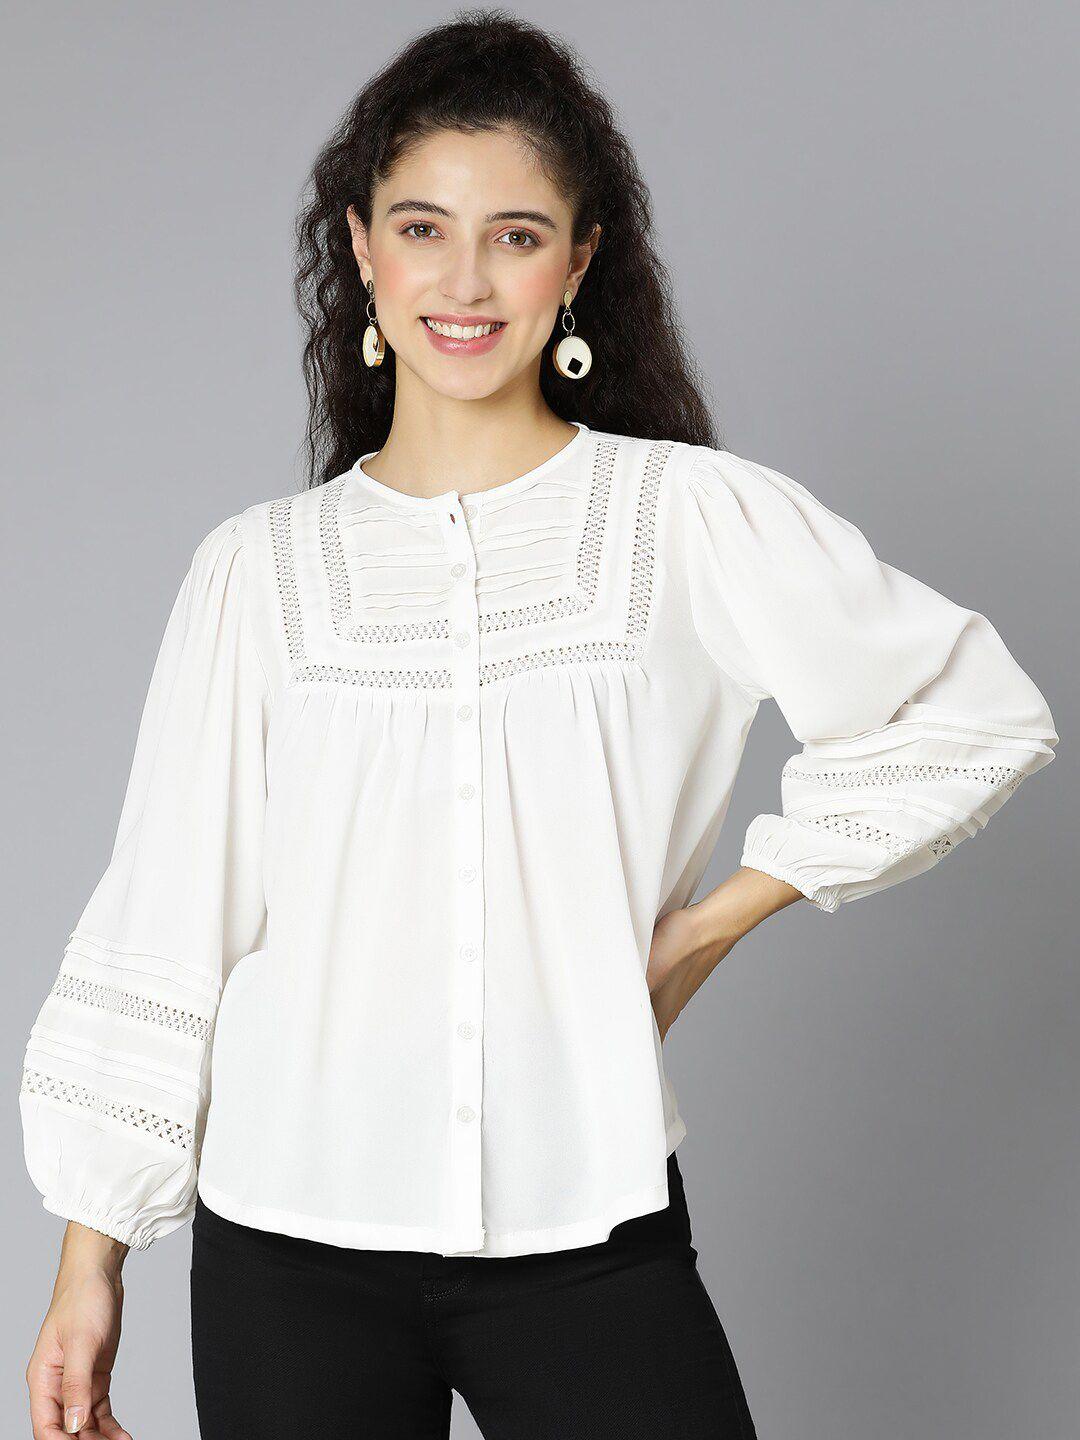 oxolloxo-white-self-designed-embroidered-cuffed-sleeves-blouson-top